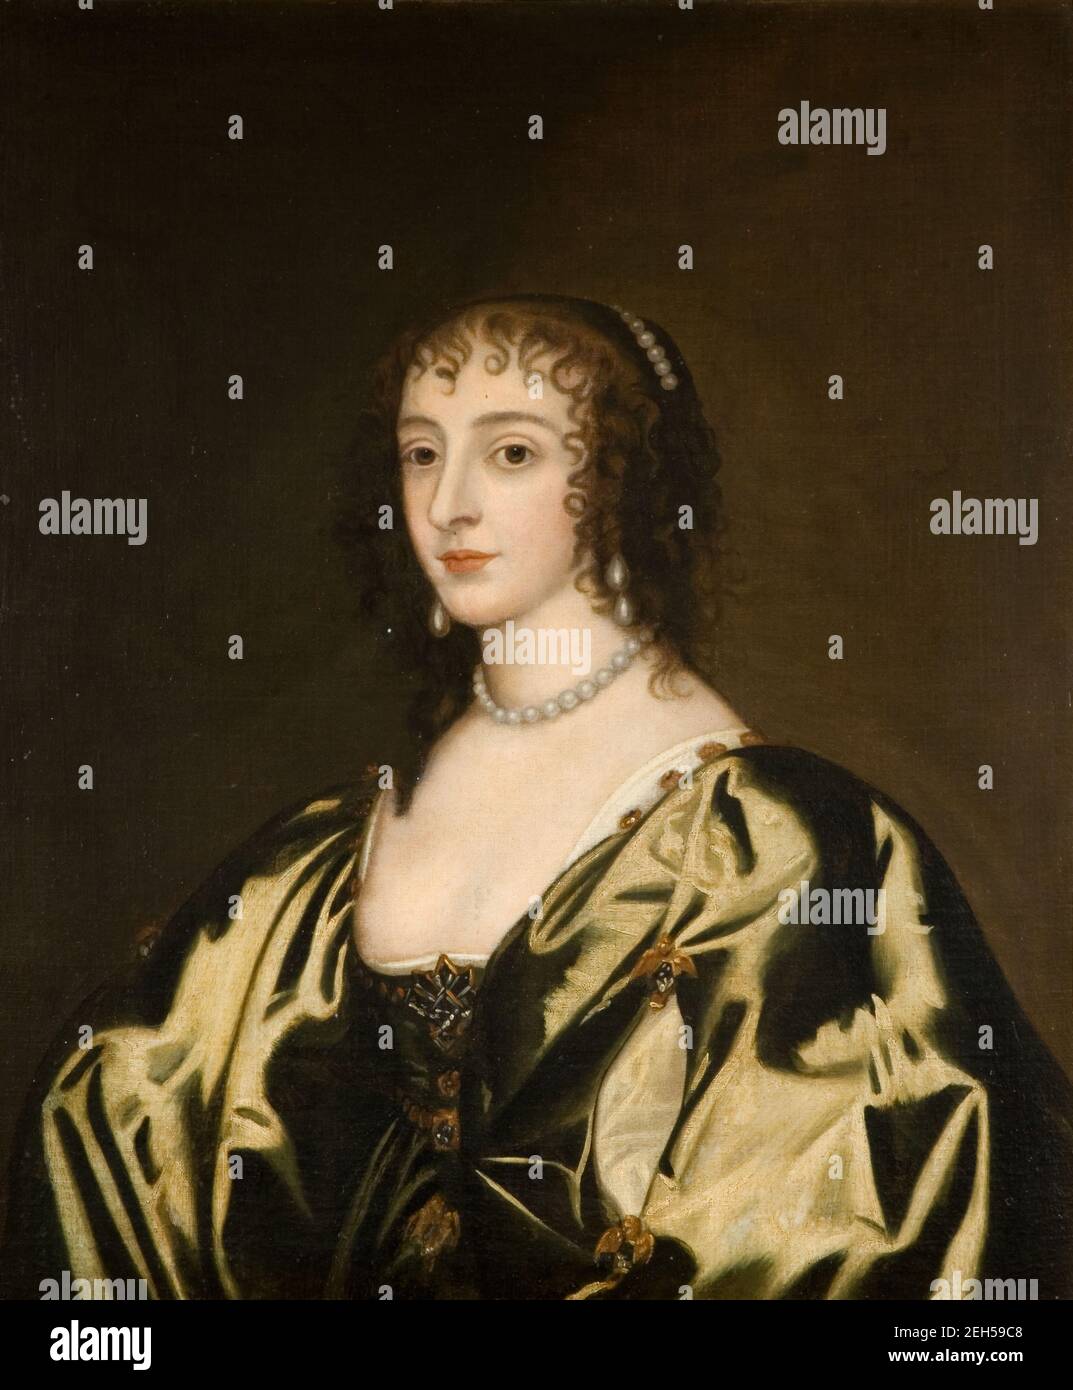 Queen Henrietta Maria, 1770. 18th-century copy of the 17th-century original, after Sir Anthony van Dyck. Noted with object description - Probably furnishing pictures for Sir Lister Holte's c.1755 redecoration at Aston Hall. Stock Photo